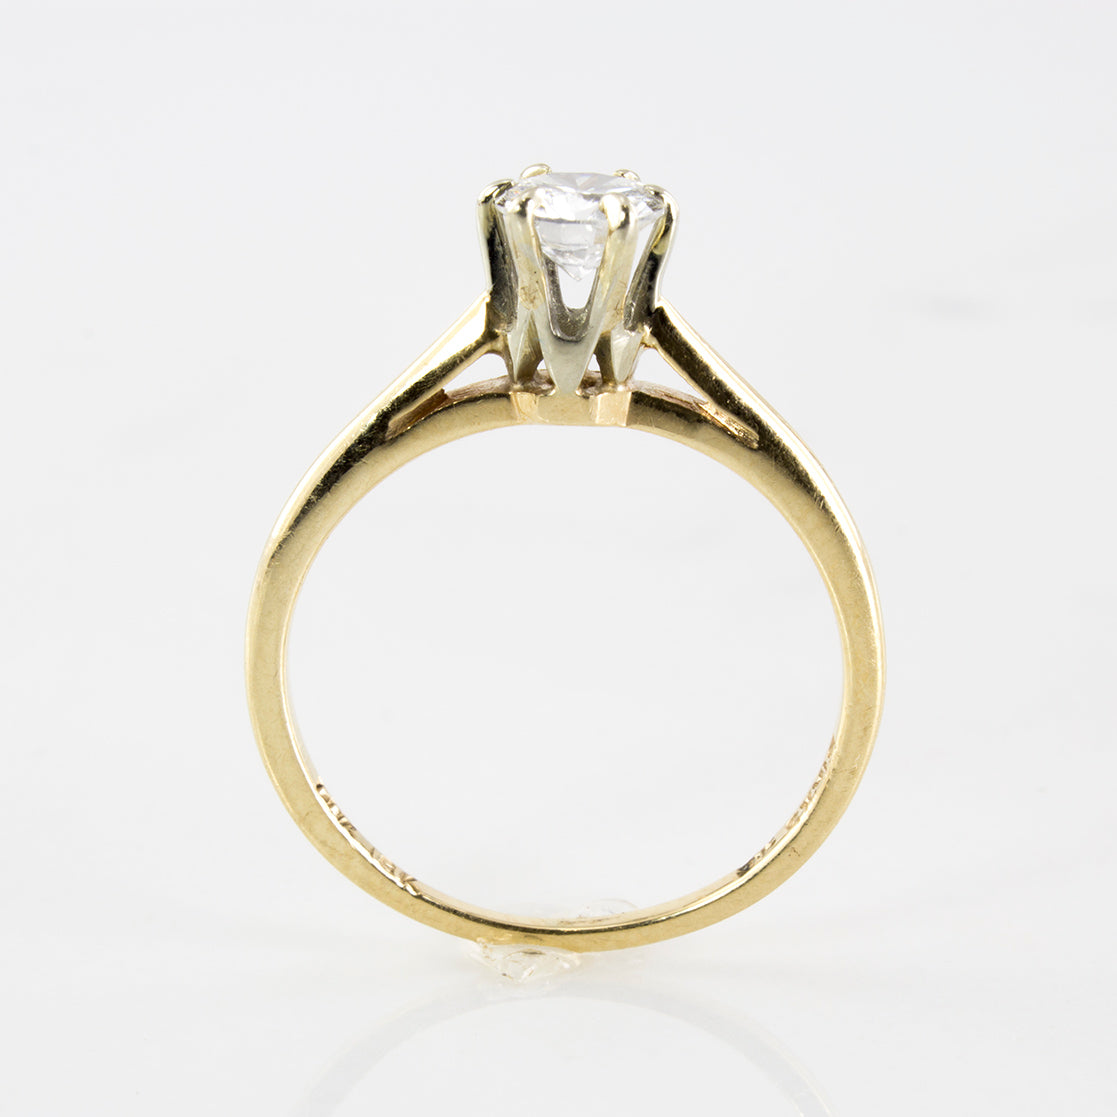 Tapered Cathedral Diamond Solitaire Ring | 0.32 ctw | SZ 4.25 |